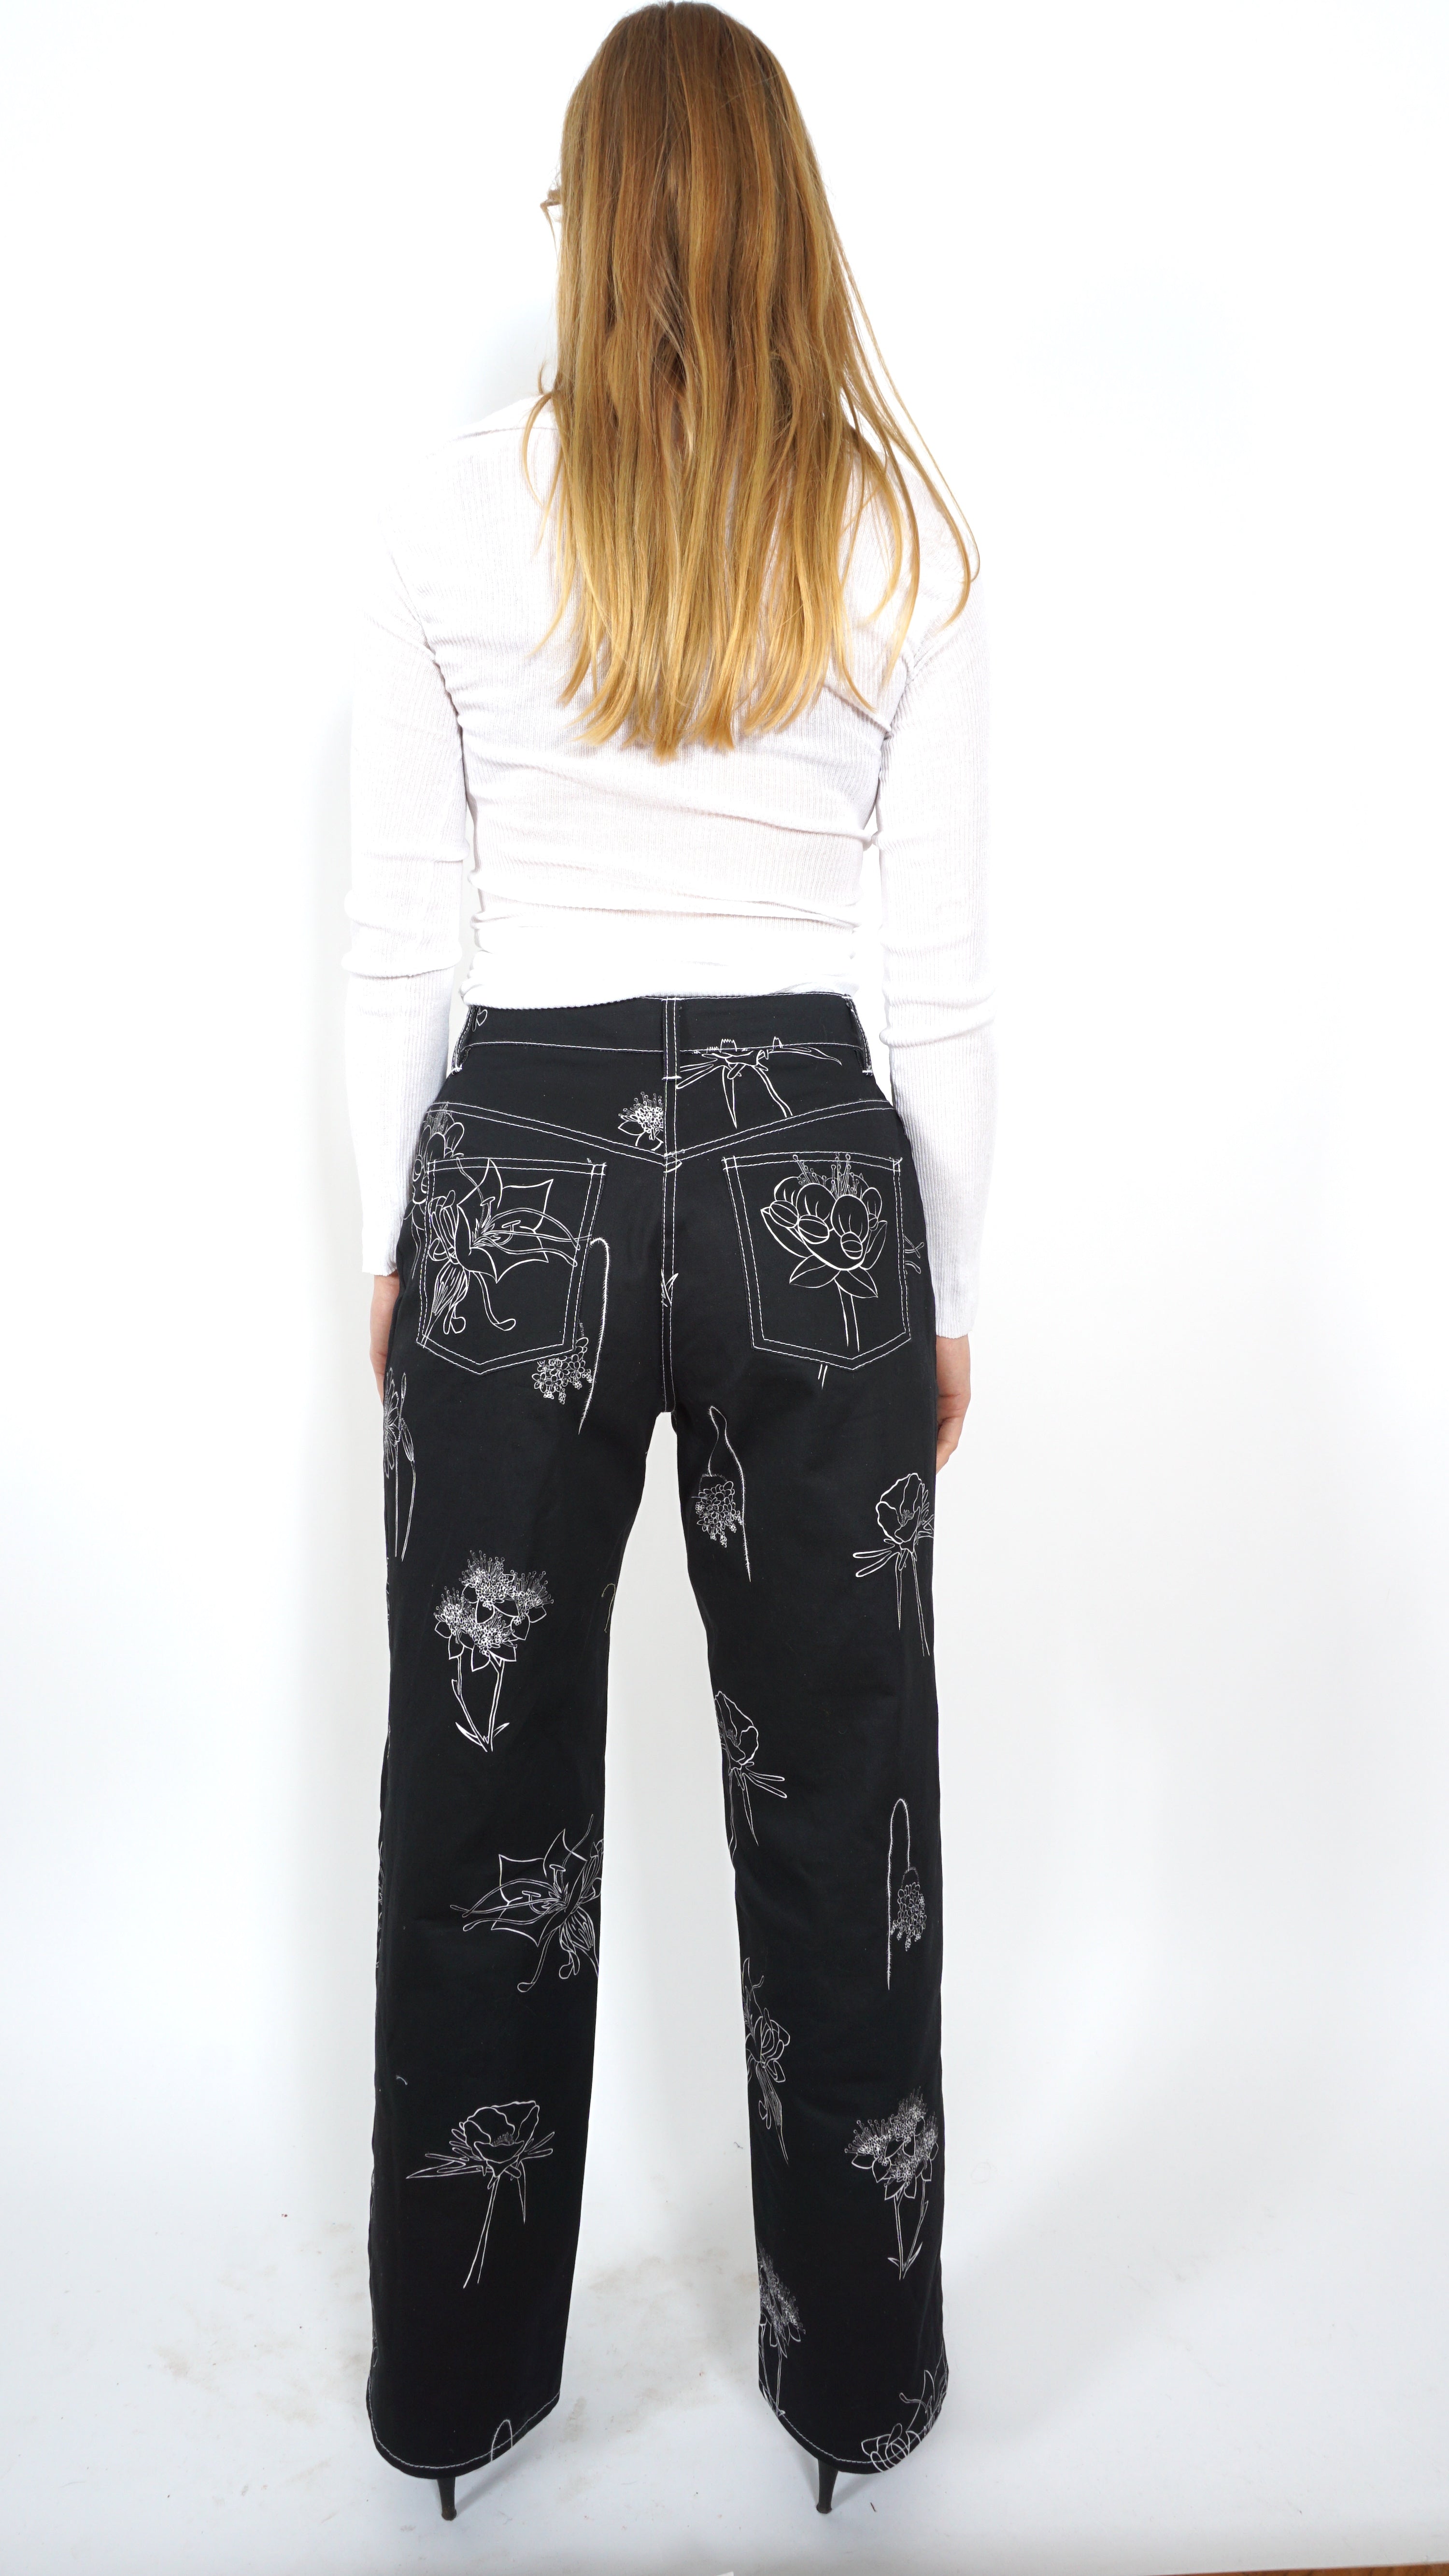 Flower trouser by Maria Holm